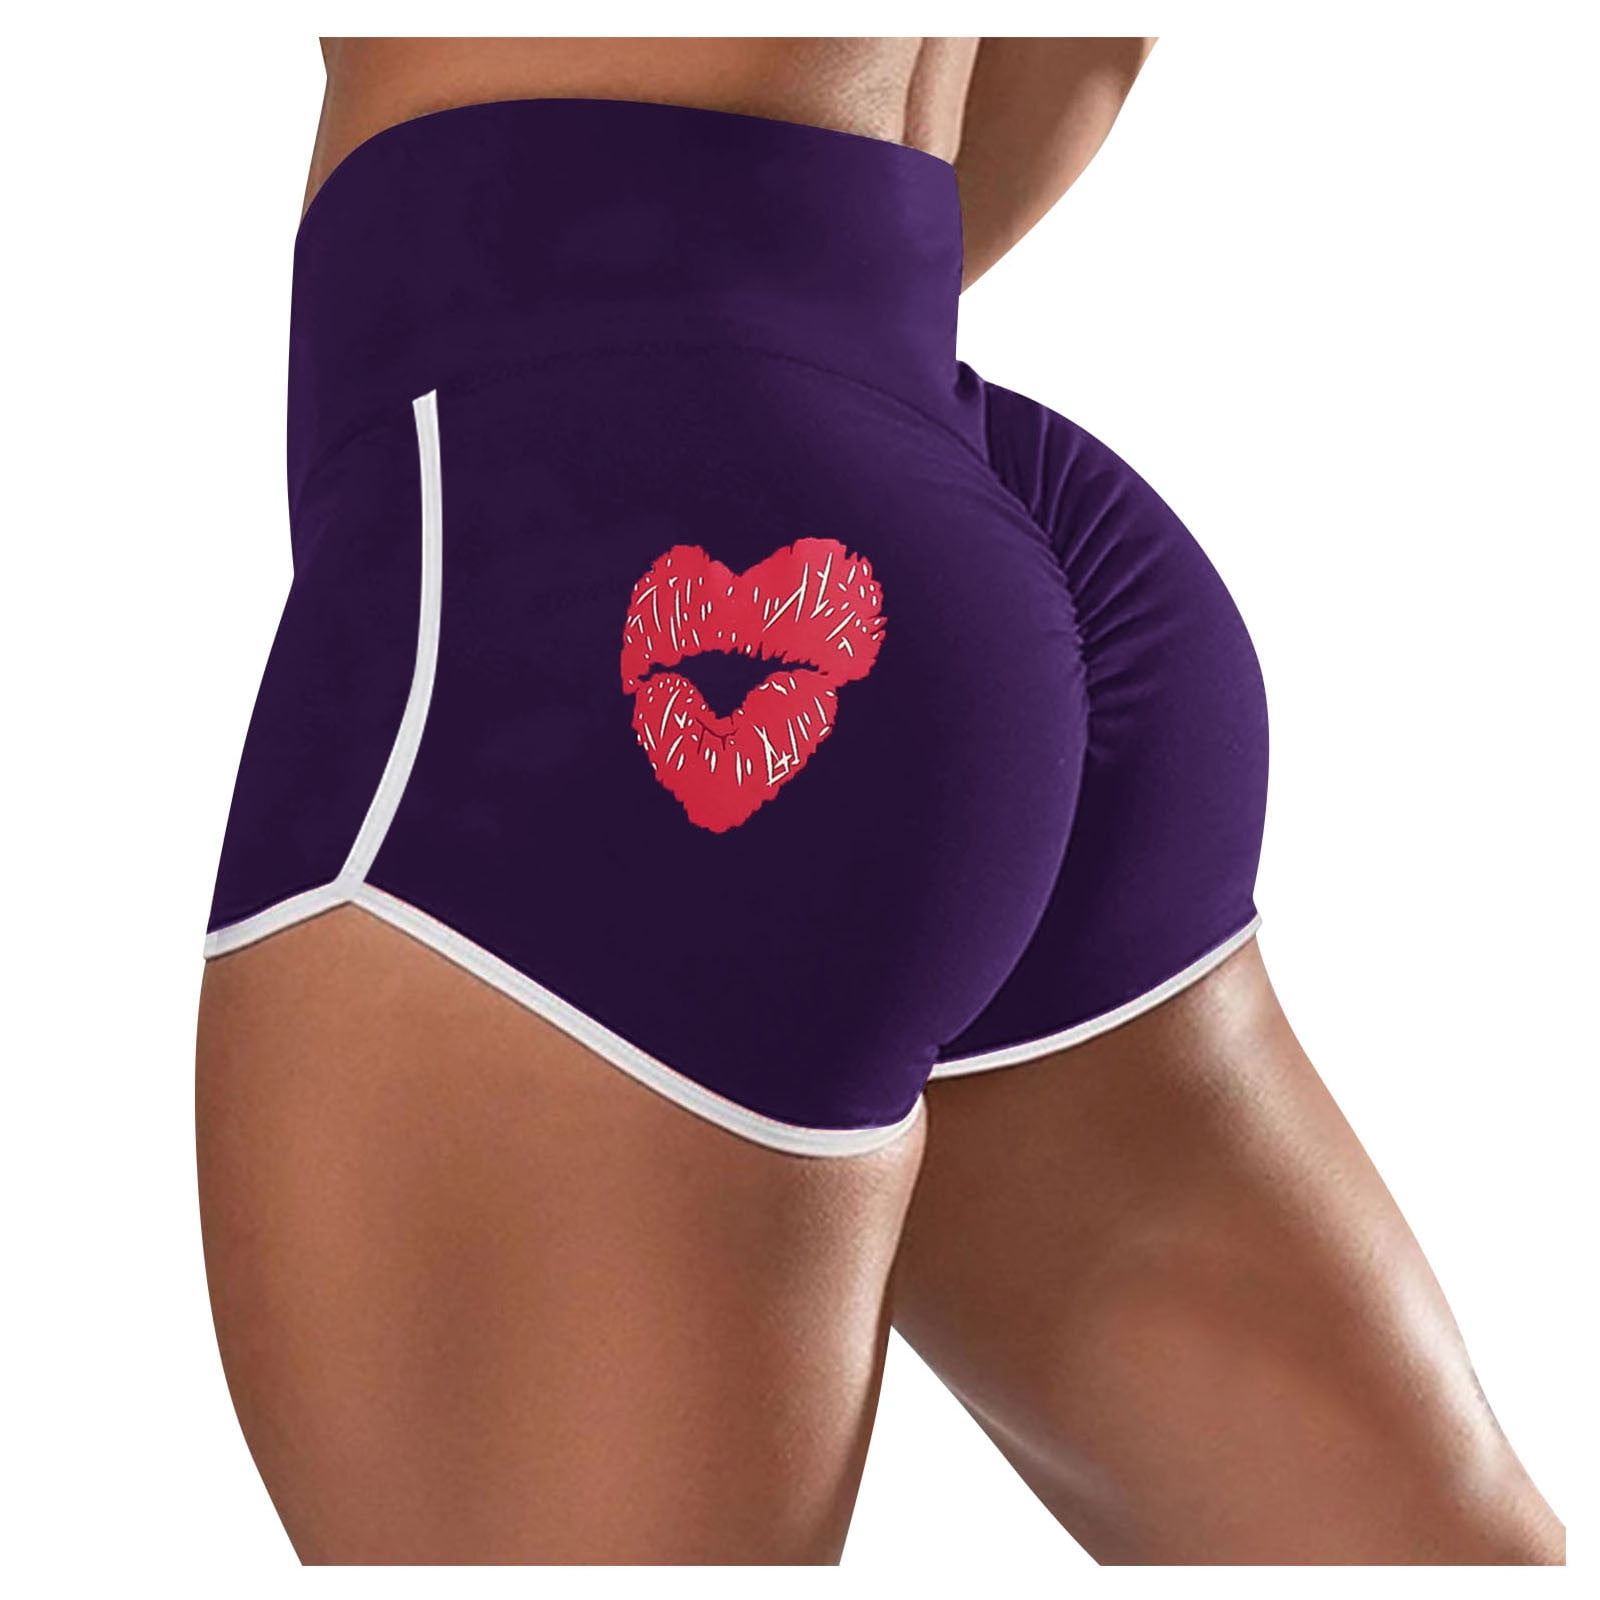 LissKiss Purple Women's Stretchy Yoga Panty Shorts - Purple Shorts :  : Clothing, Shoes & Accessories